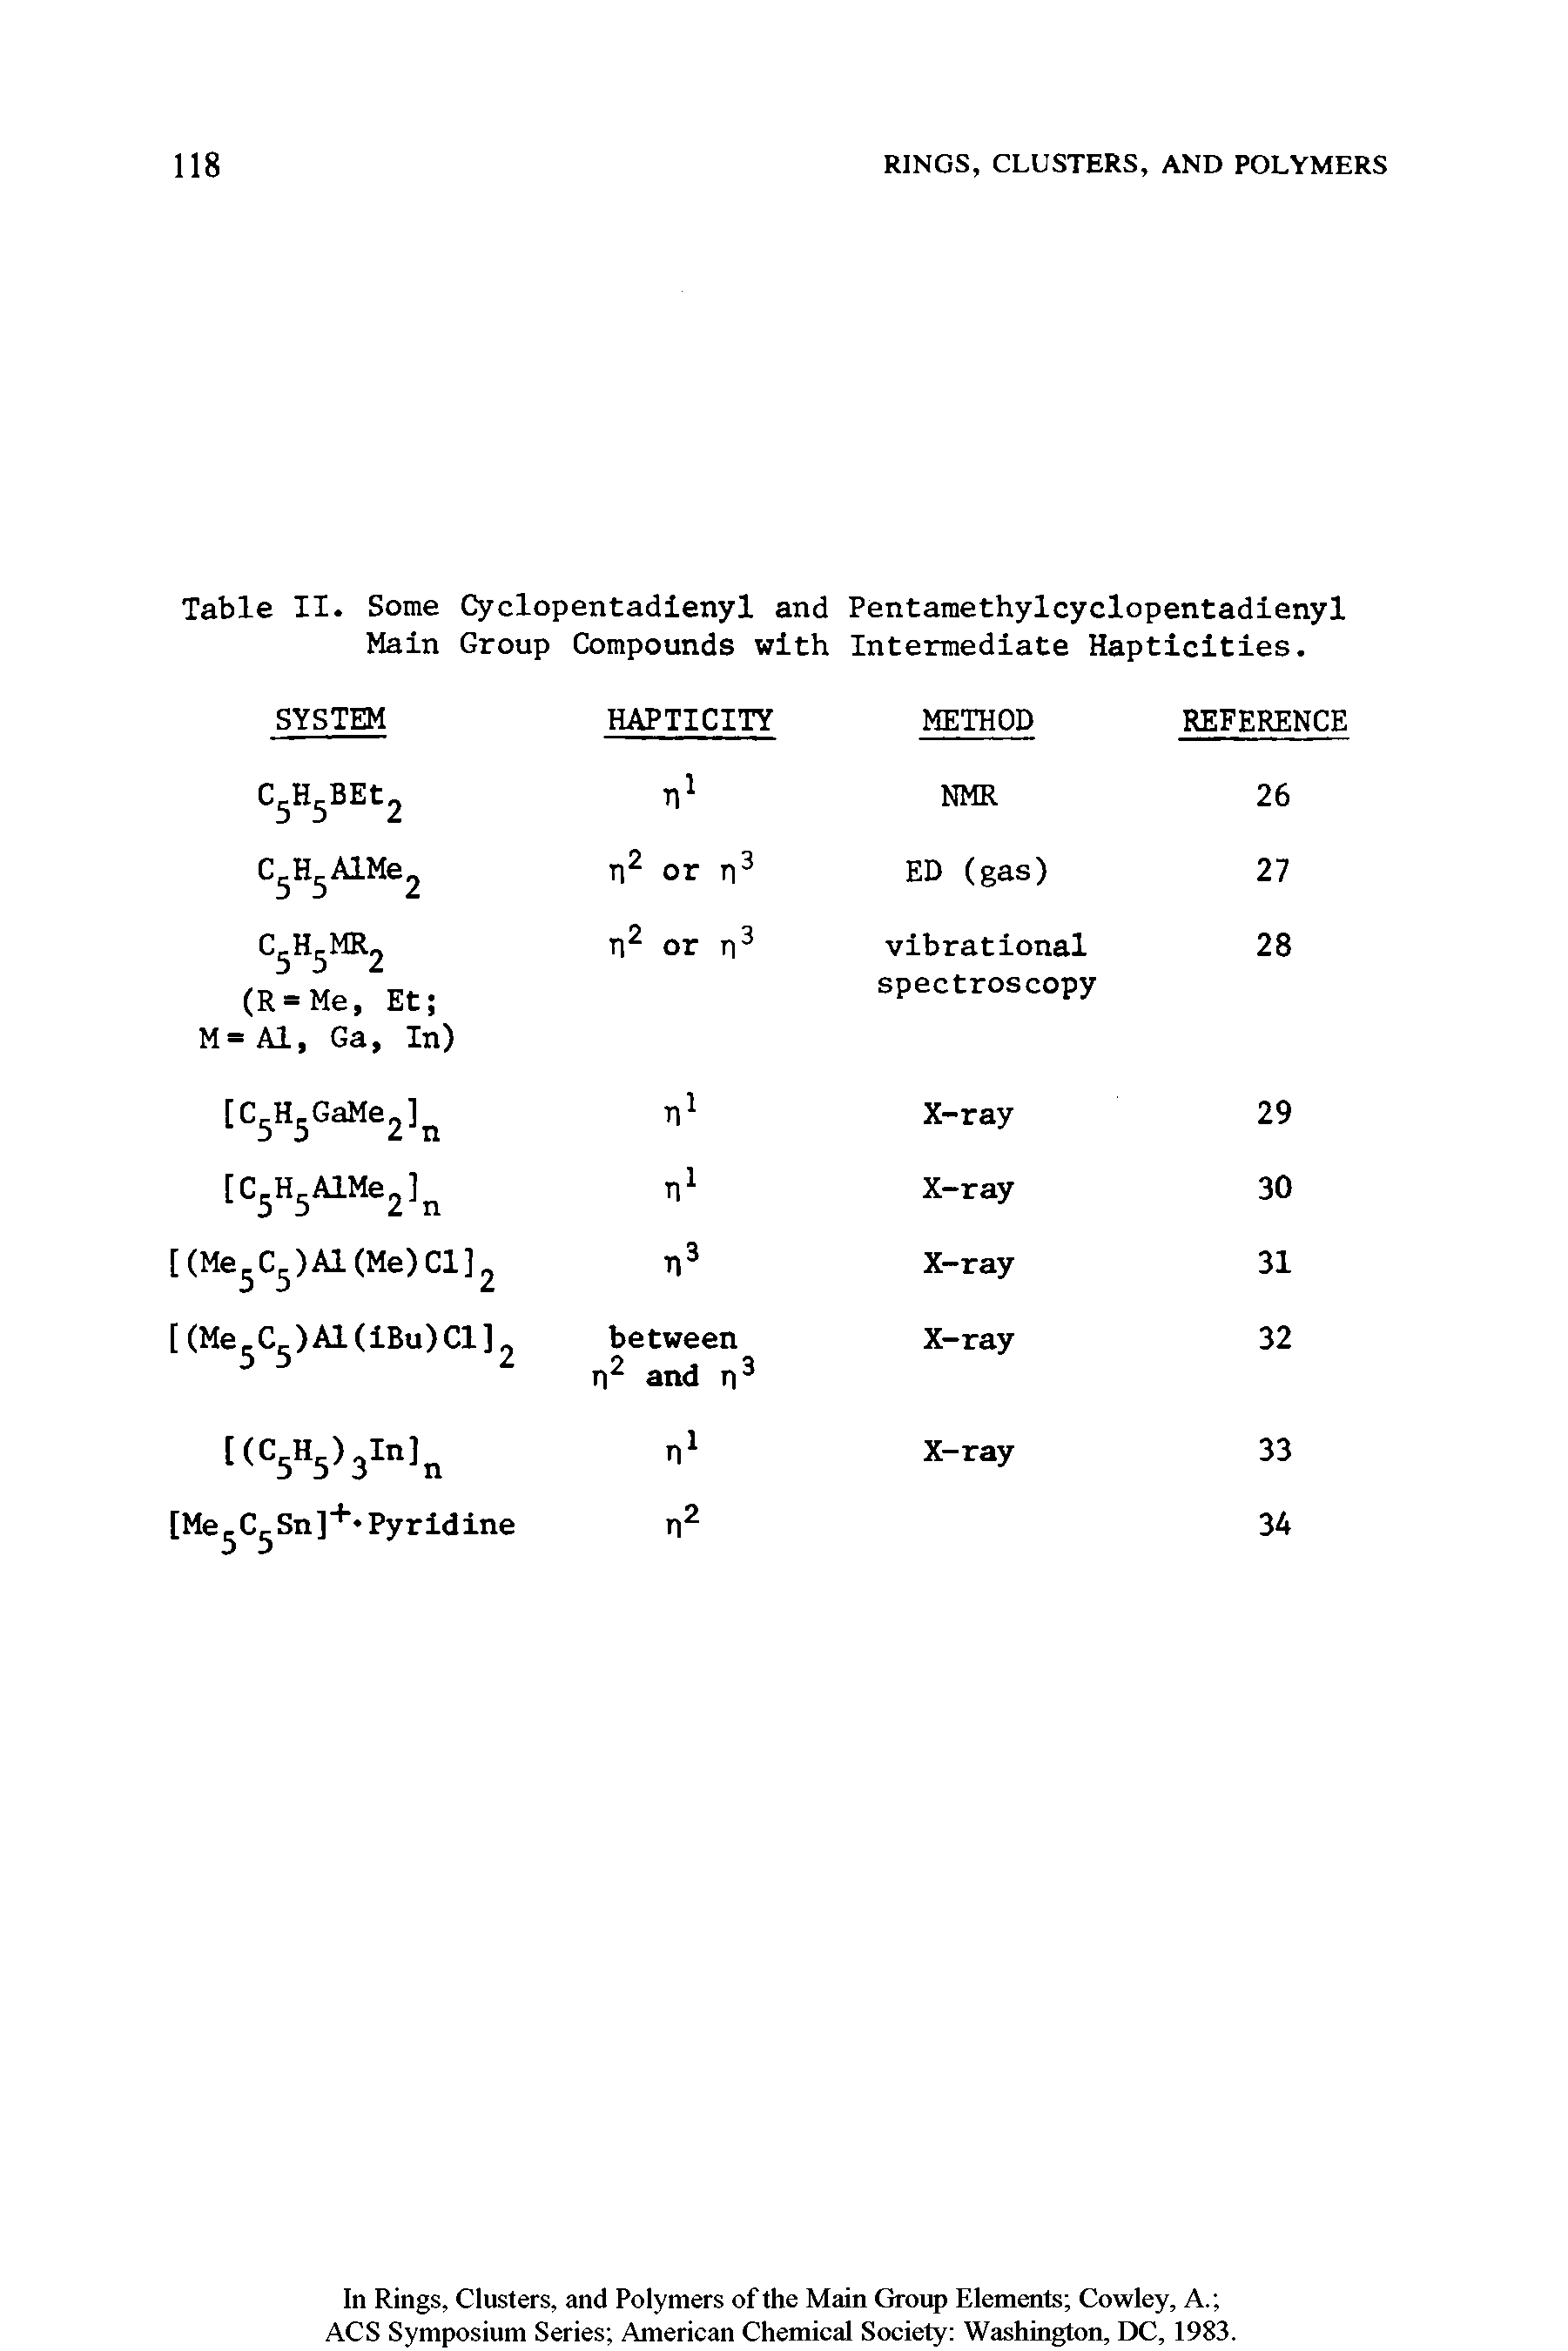 Table II. Some Cyclopentadlenyl and Pentamethylcyclopentadienyl Main Group Compounds with Intermediate Haptlclties.